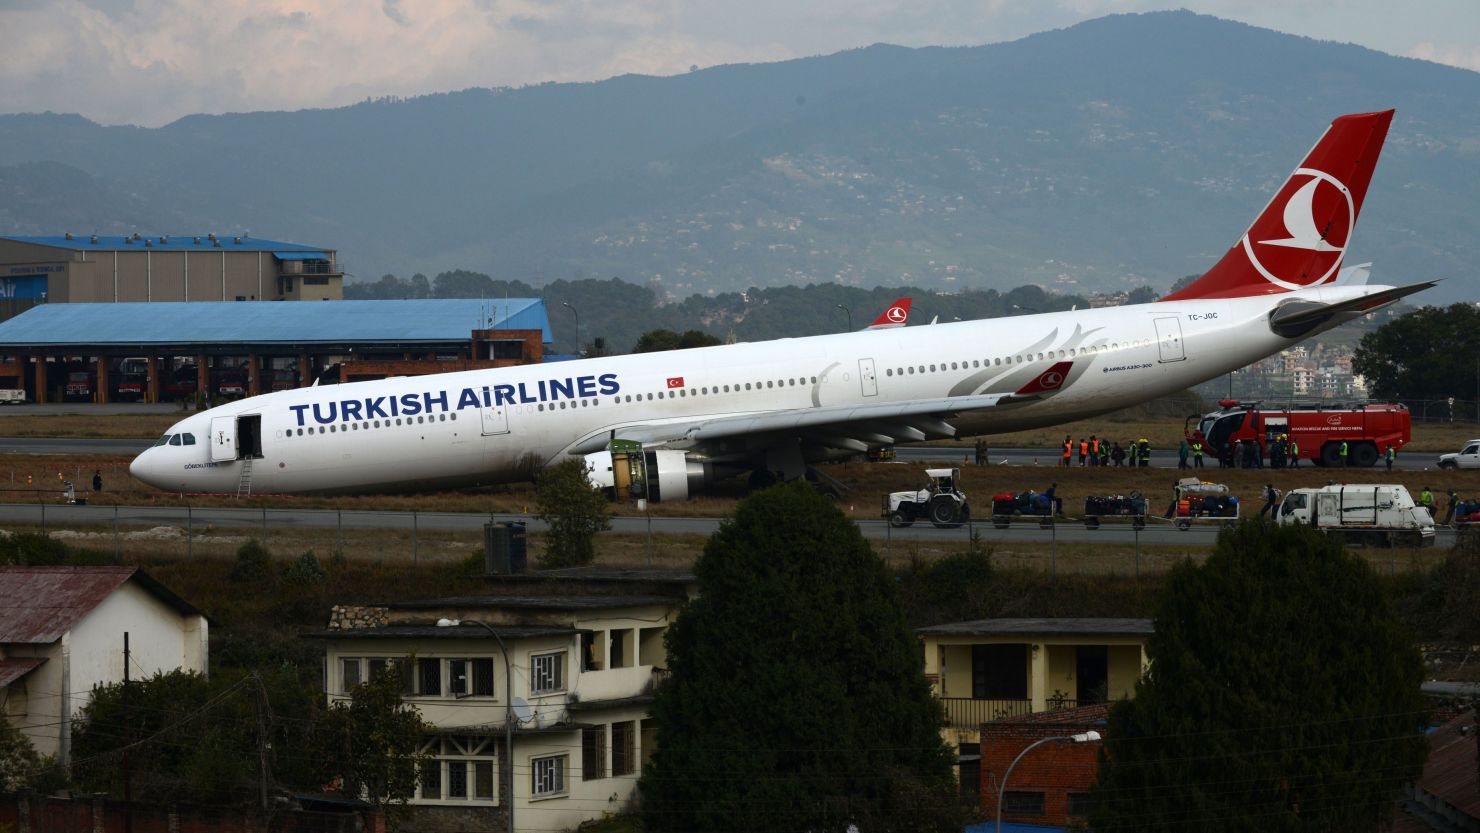 A Turkish Airlines jet skidded off a runway Wednesday morning at Kathmandu's airport, shutting down Nepal's lone international airport.